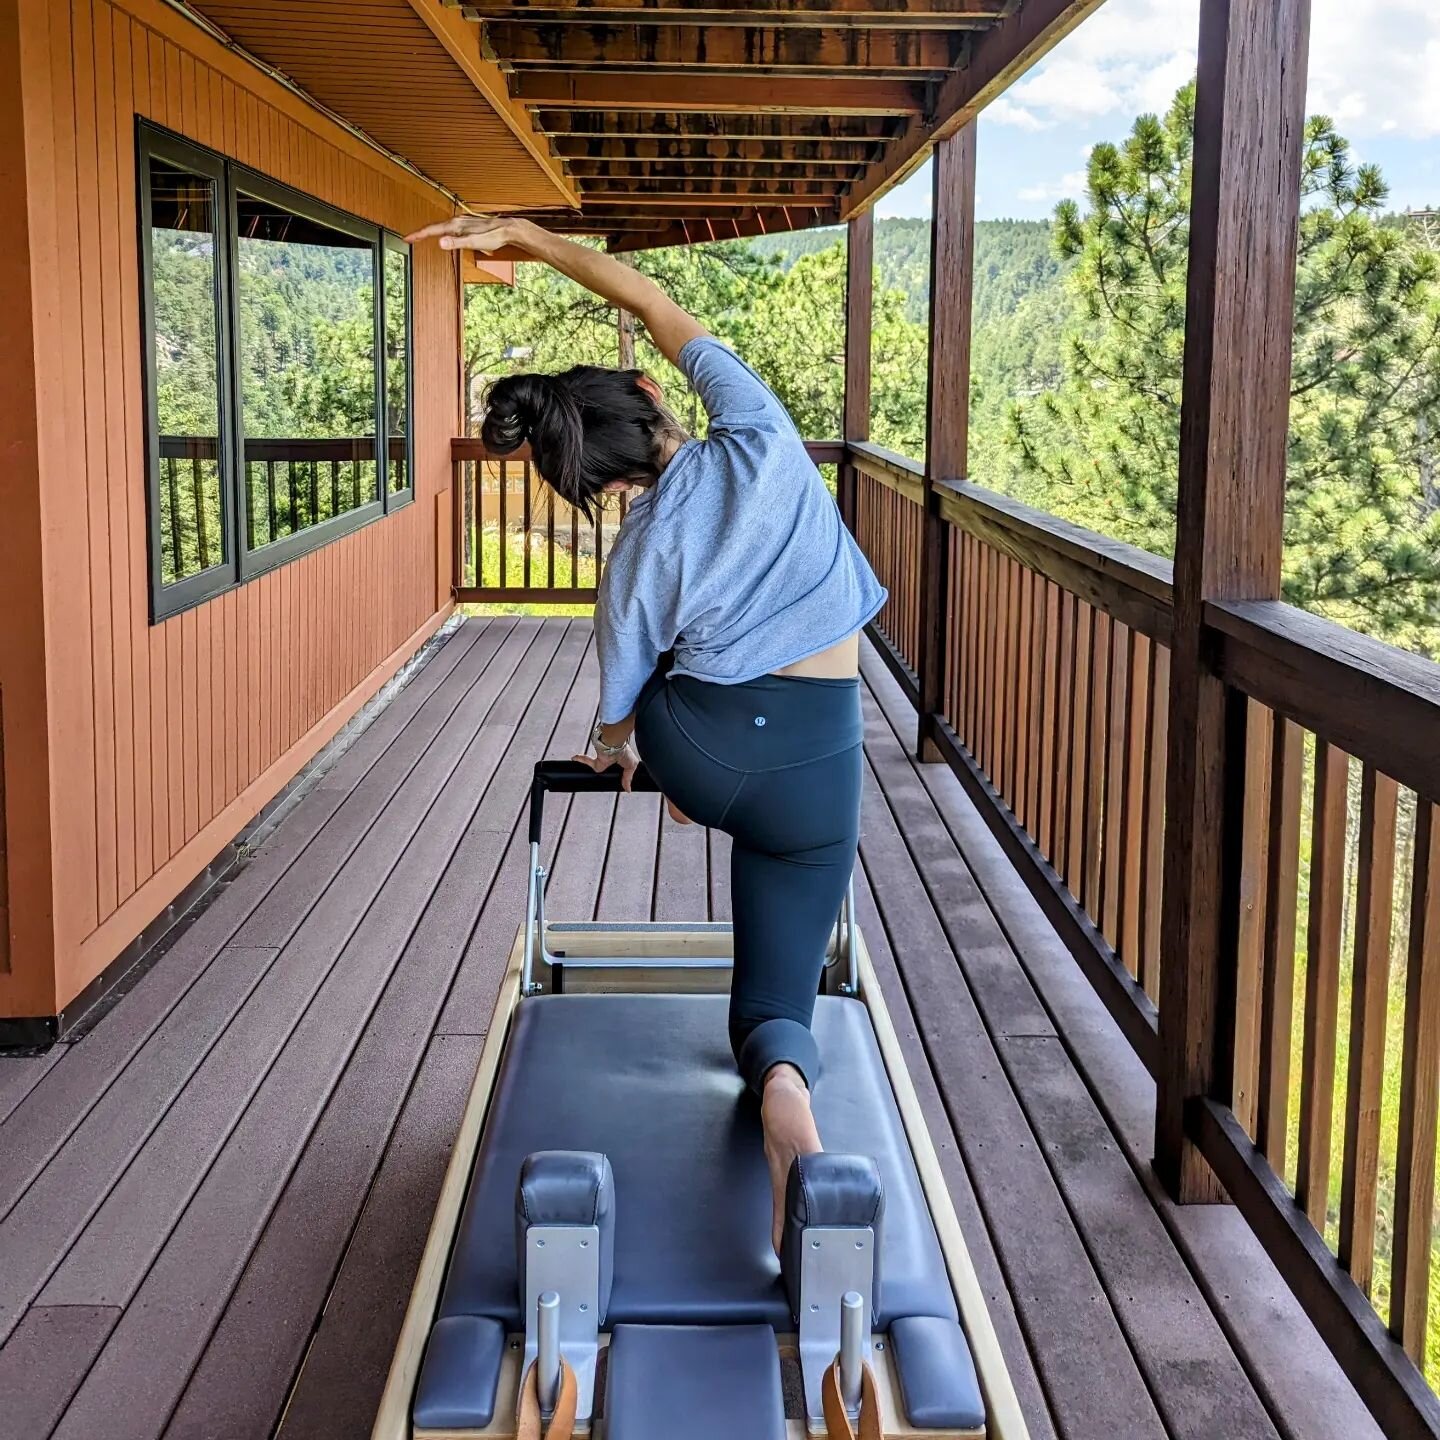 ✨ Student Highlight ✨

Meet Bridget: 
Pilates helps me find a balance between flexibility and strength and a connection to movement and breath. I can feel myself growing stronger and have a new awareness of my breathing which both greatly improve my 